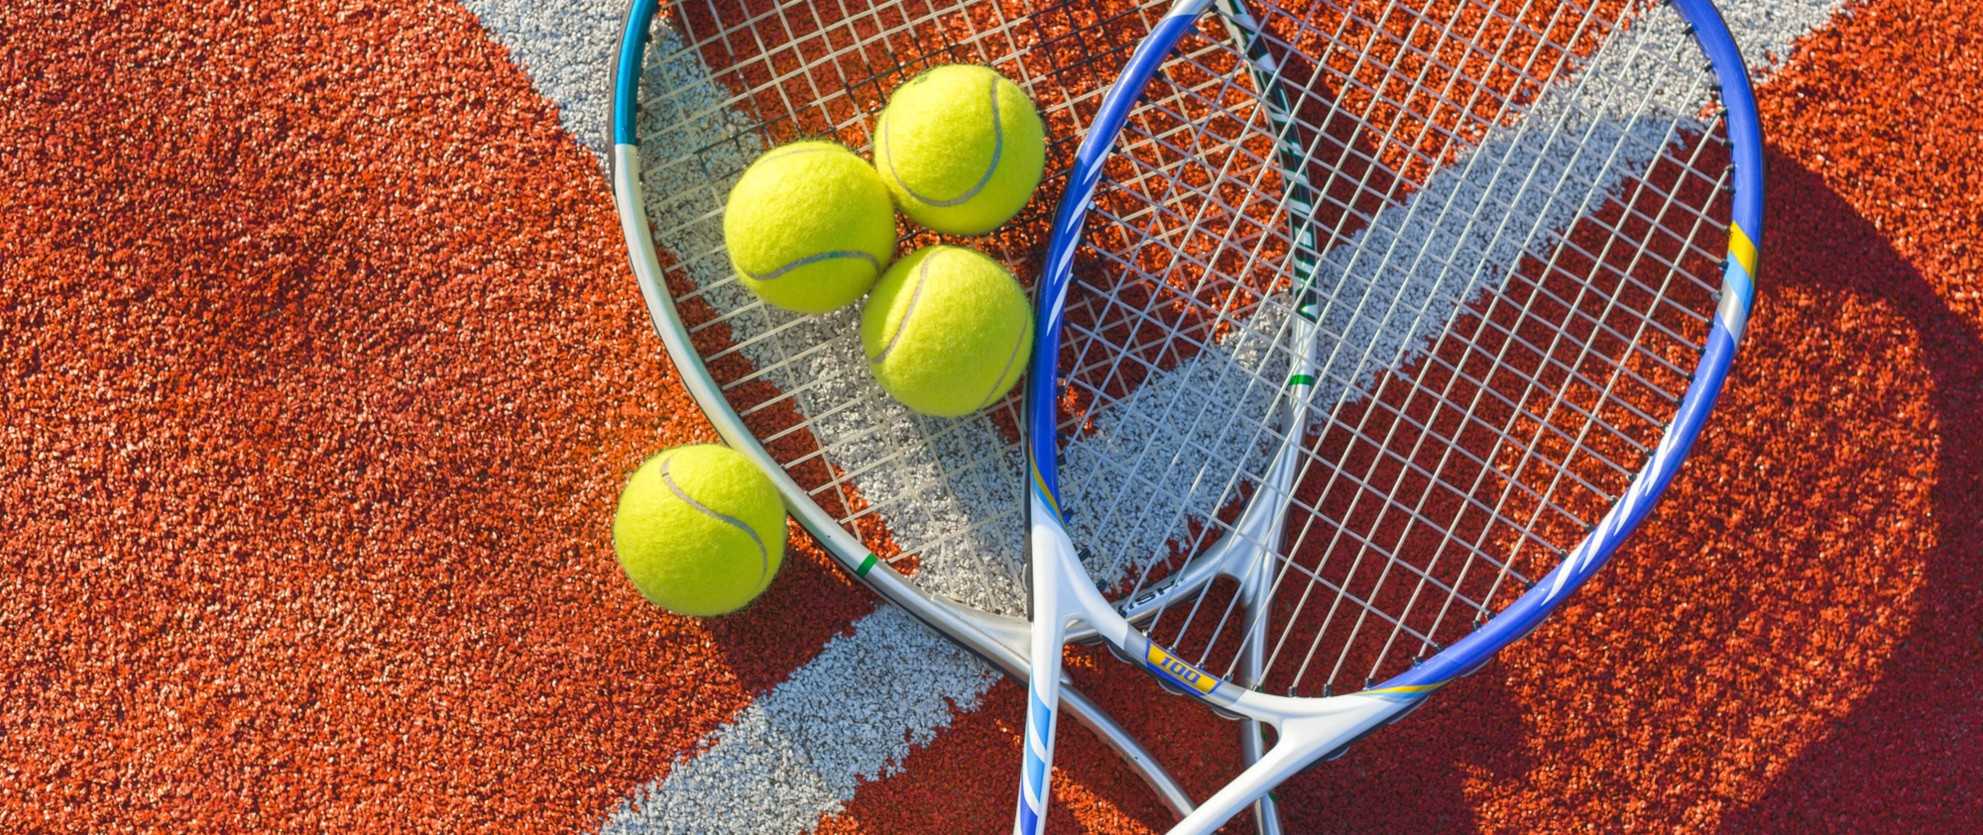 TENNIS AND PADEL ACCESSORIES